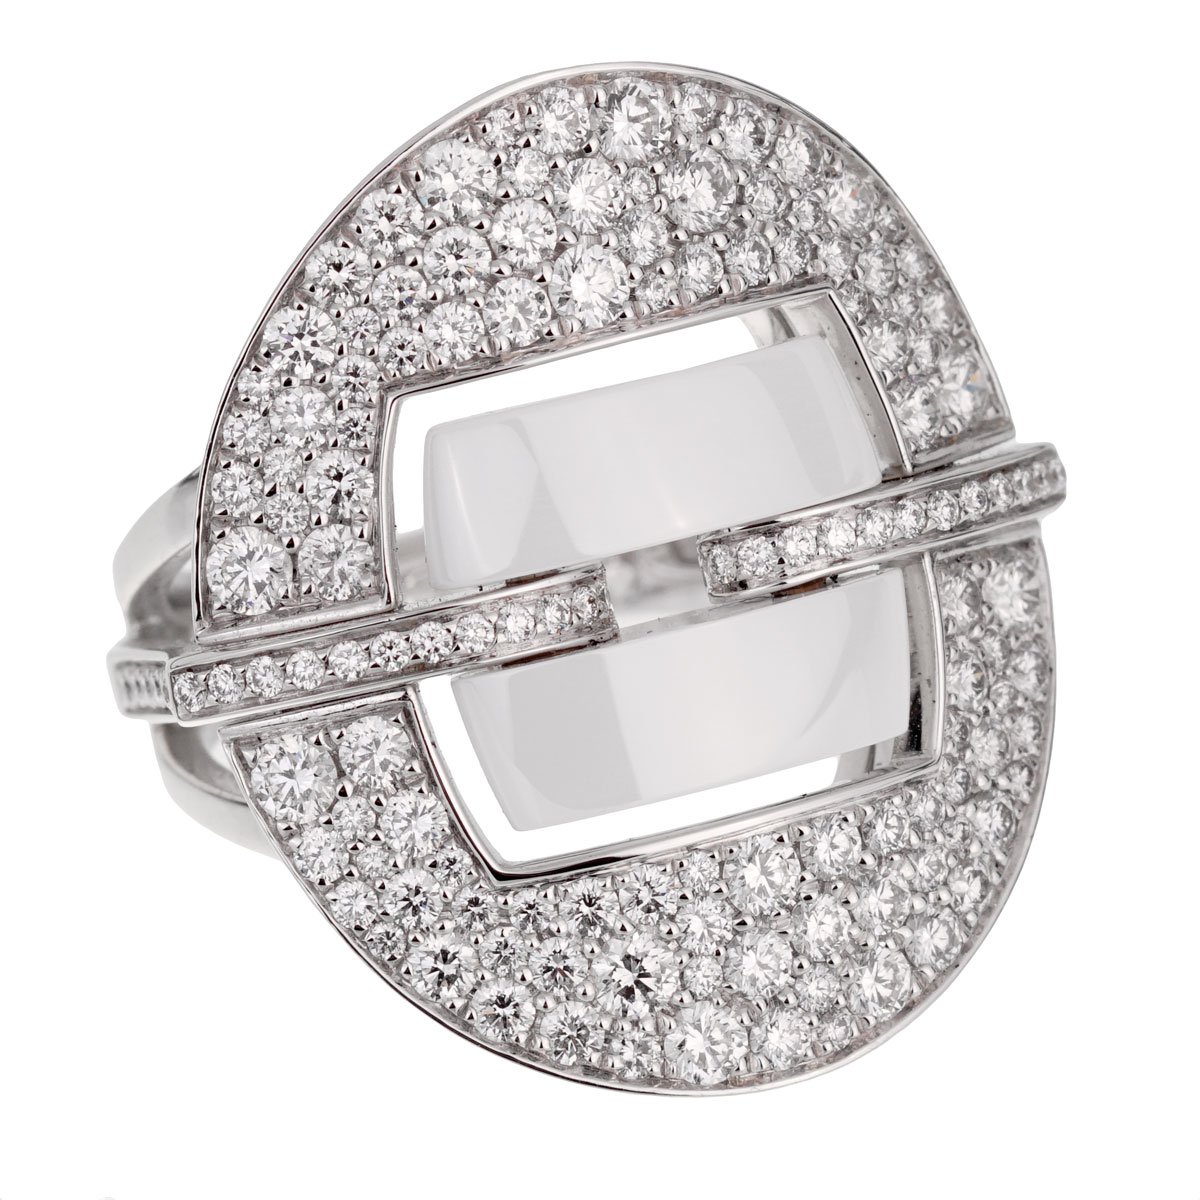 Chanel Ultra Ring - 12 For Sale on 1stDibs  chanel ultra ring white, chanel  white ceramic ring, chanel ultra ring black